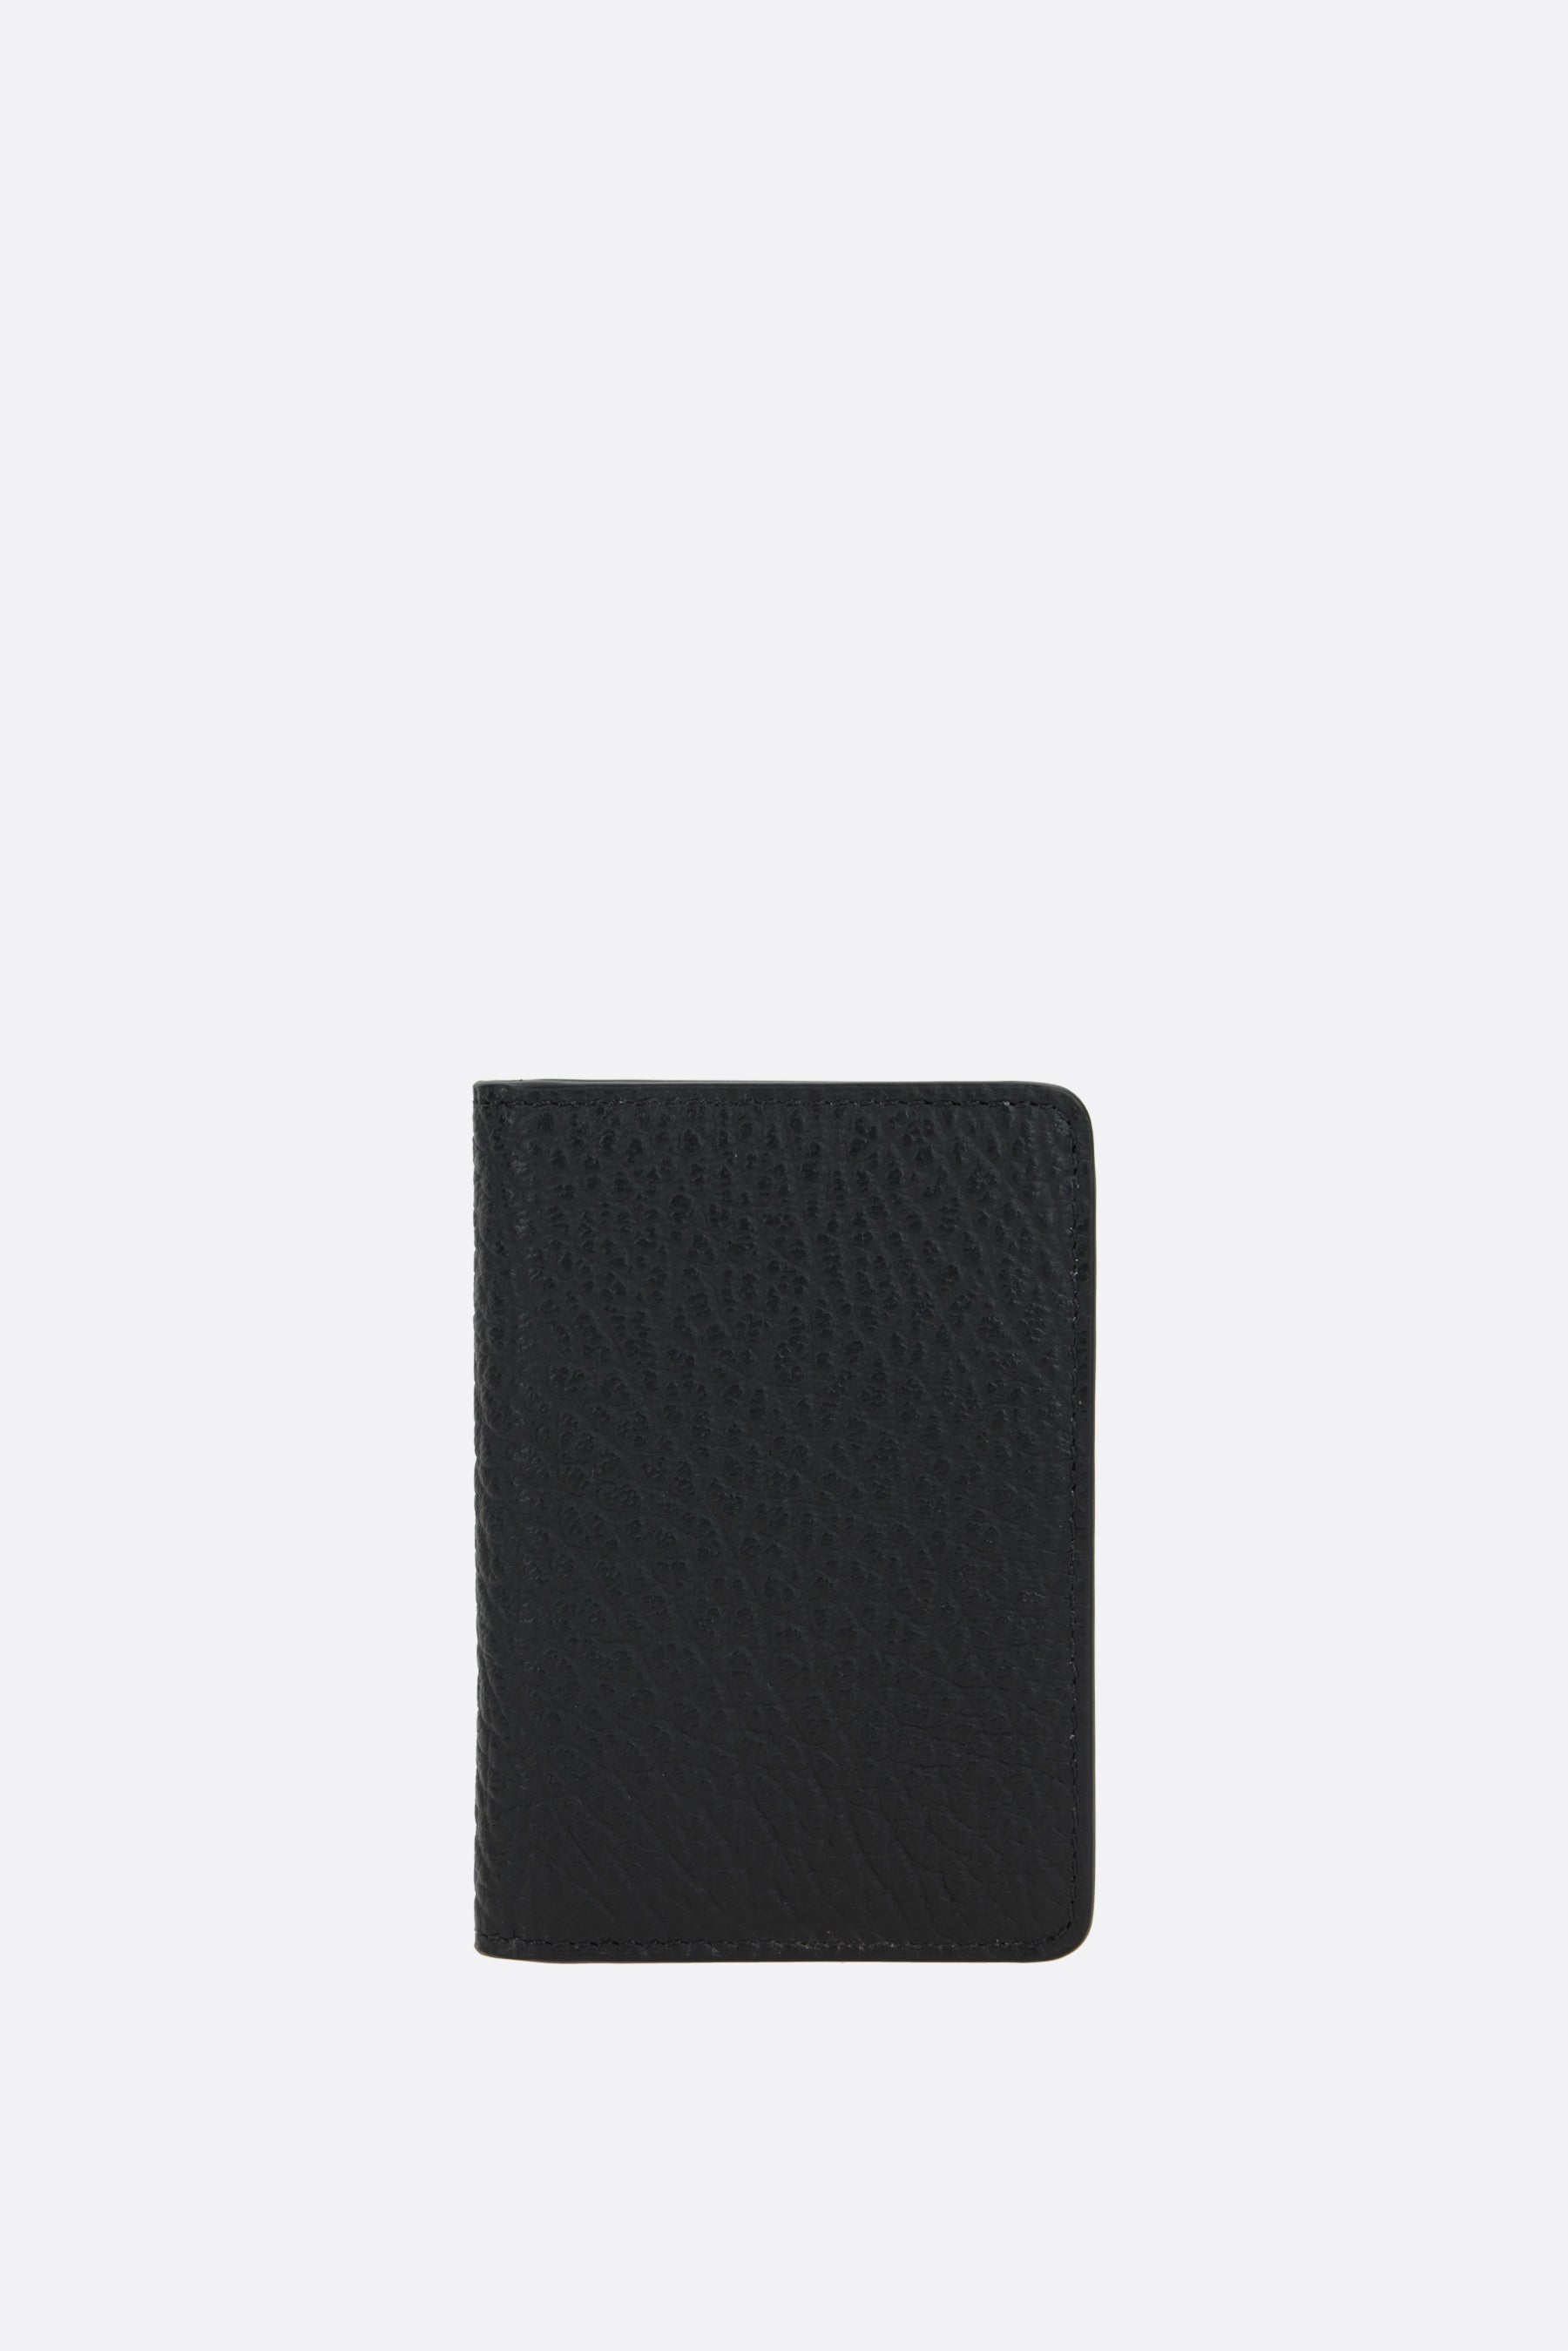 Four Stitches grainy leather card case